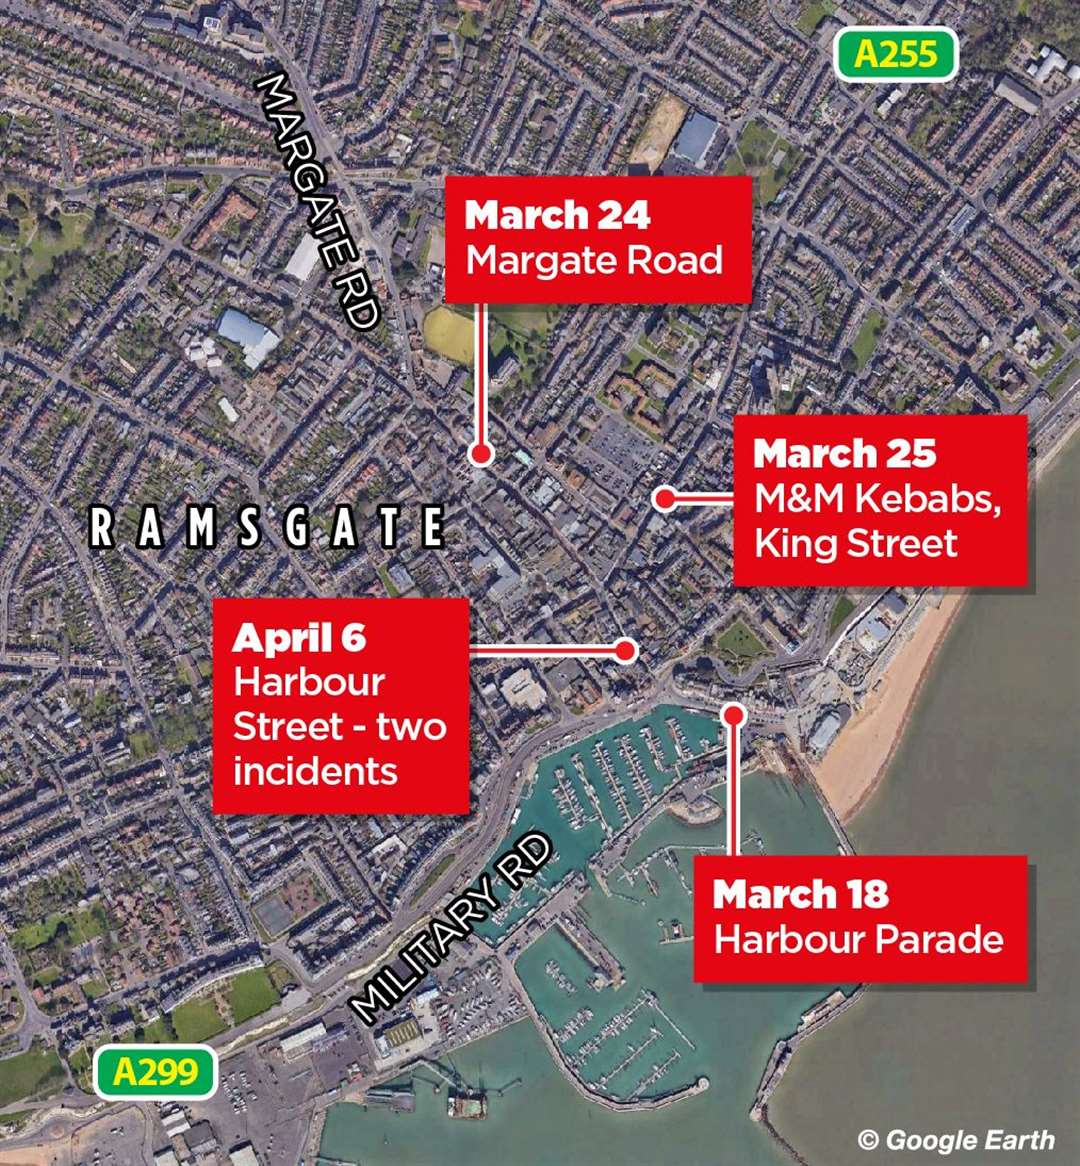 There have been five stabbings in four separate incidents in Ramsgate since March 18